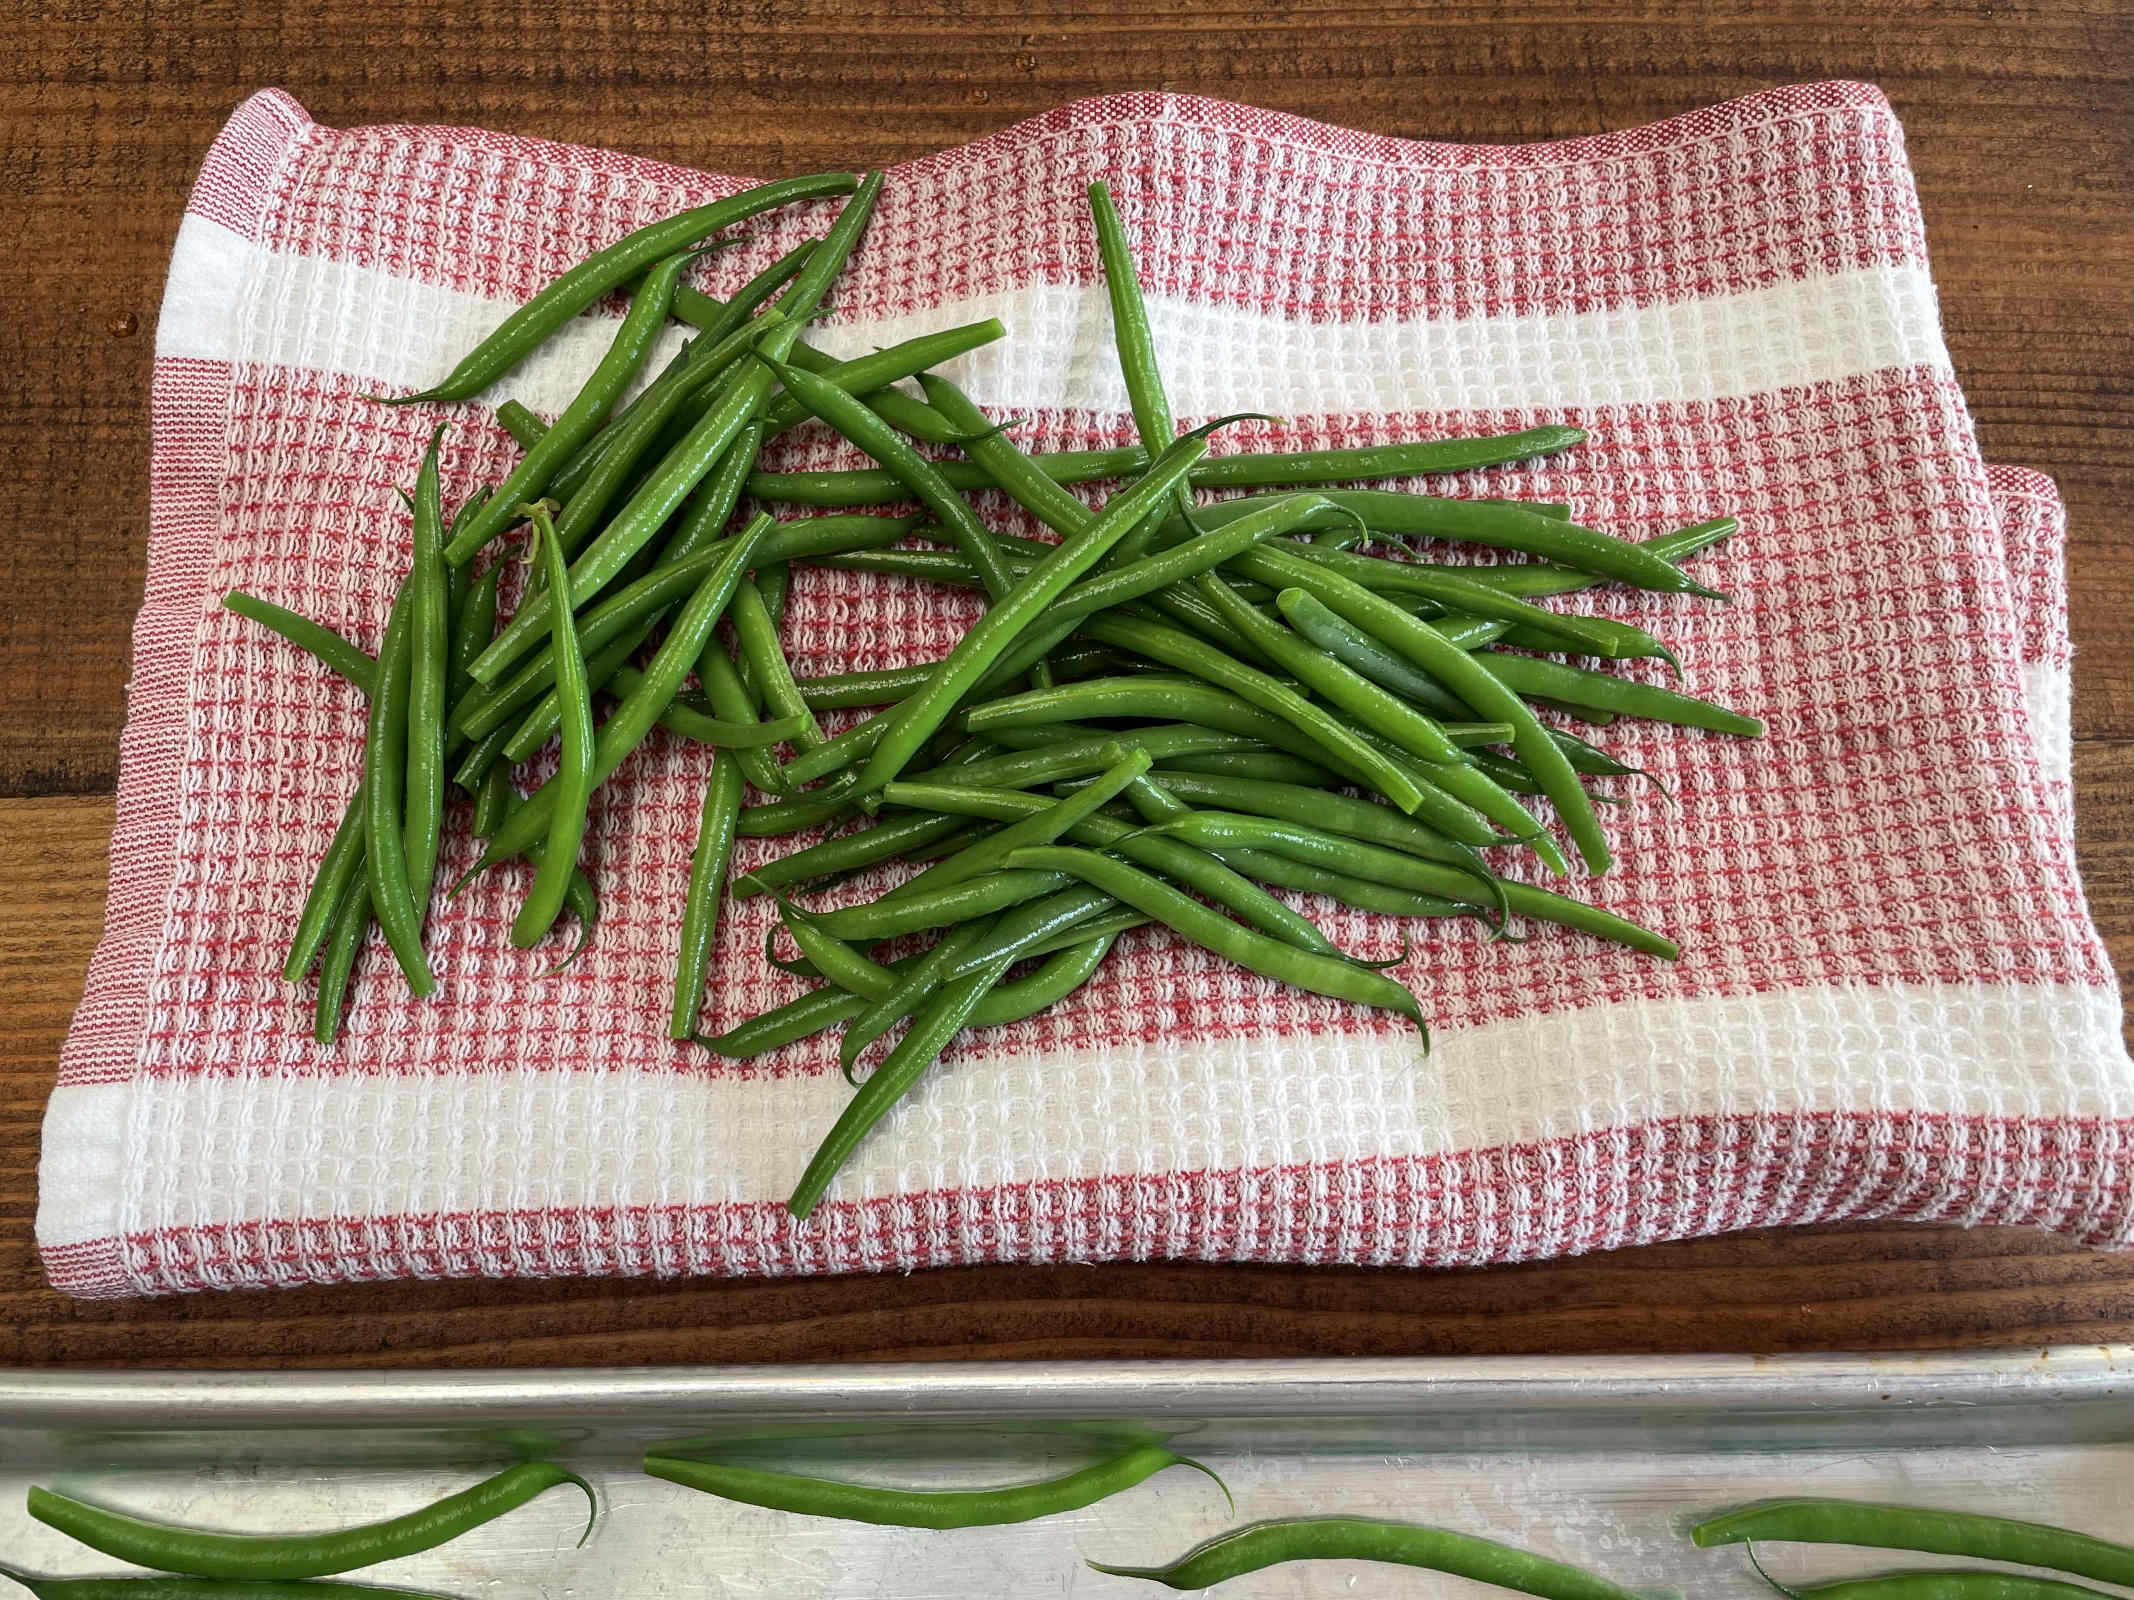 Blanched green beans drain on a red checked cotton dishtowel sitting on a dark wooden table